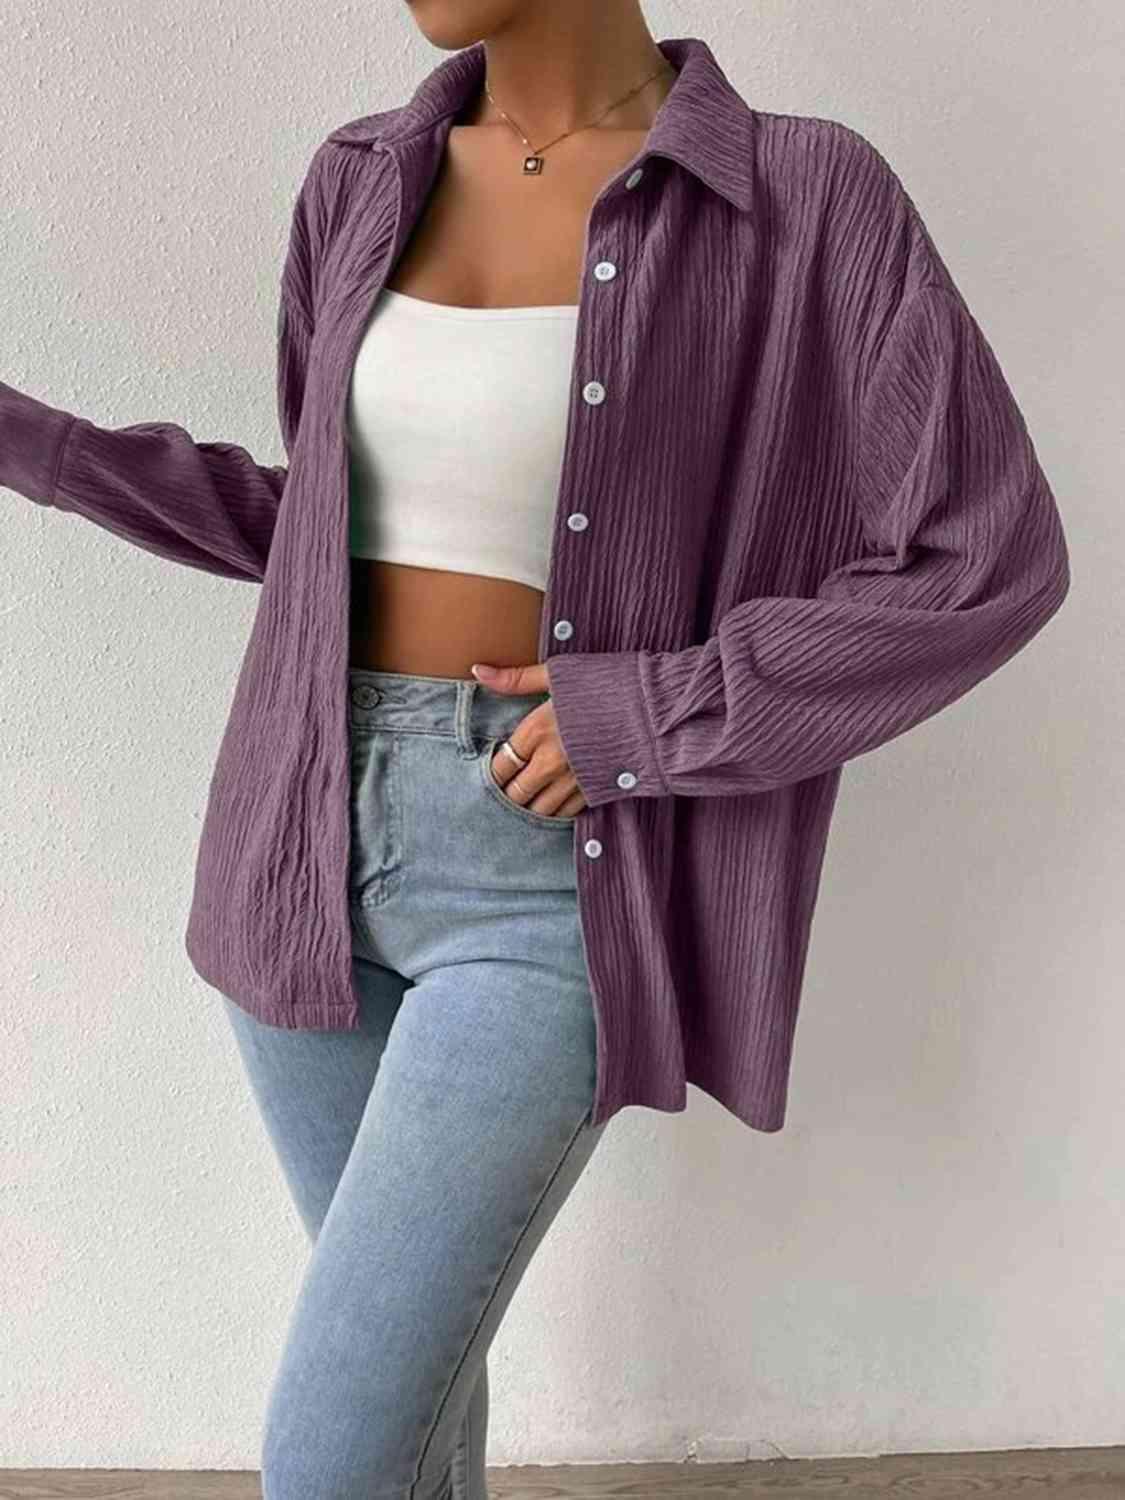 a woman wearing a purple jacket and jeans